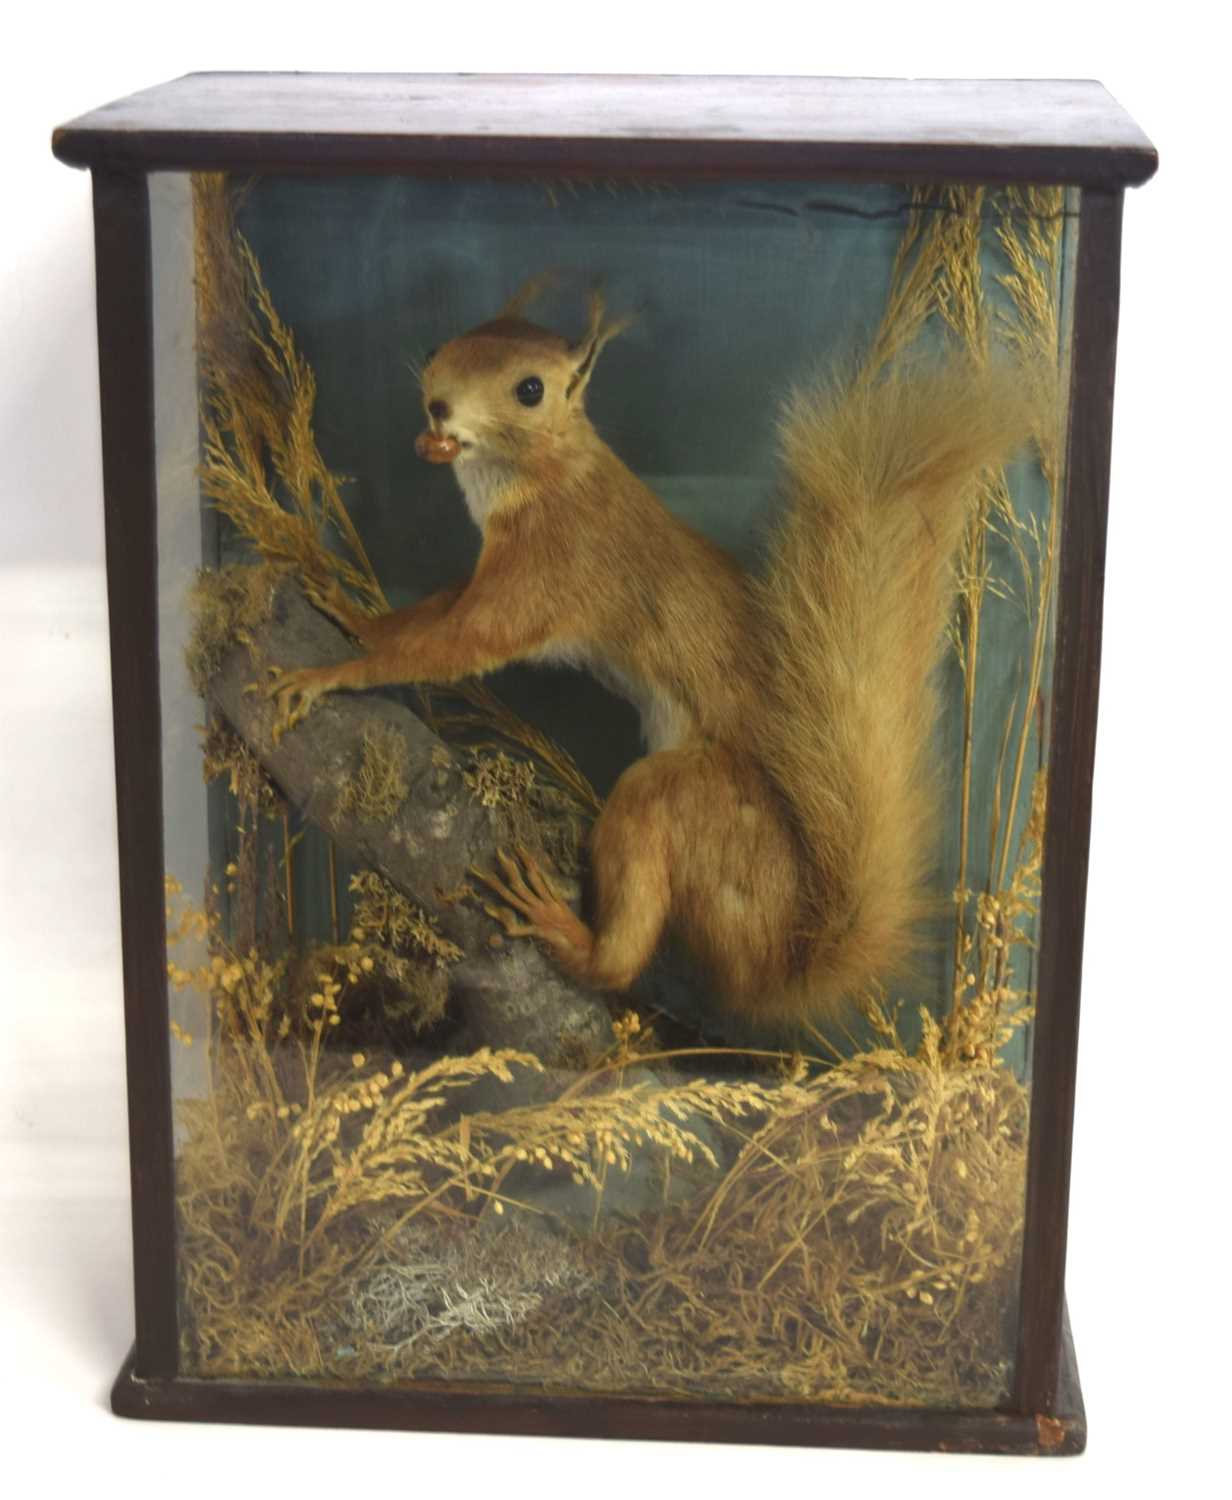 Victorian taxidermy cased red squirrel (Sciurus vulgaris) with nut in mouth in three glass Pannel